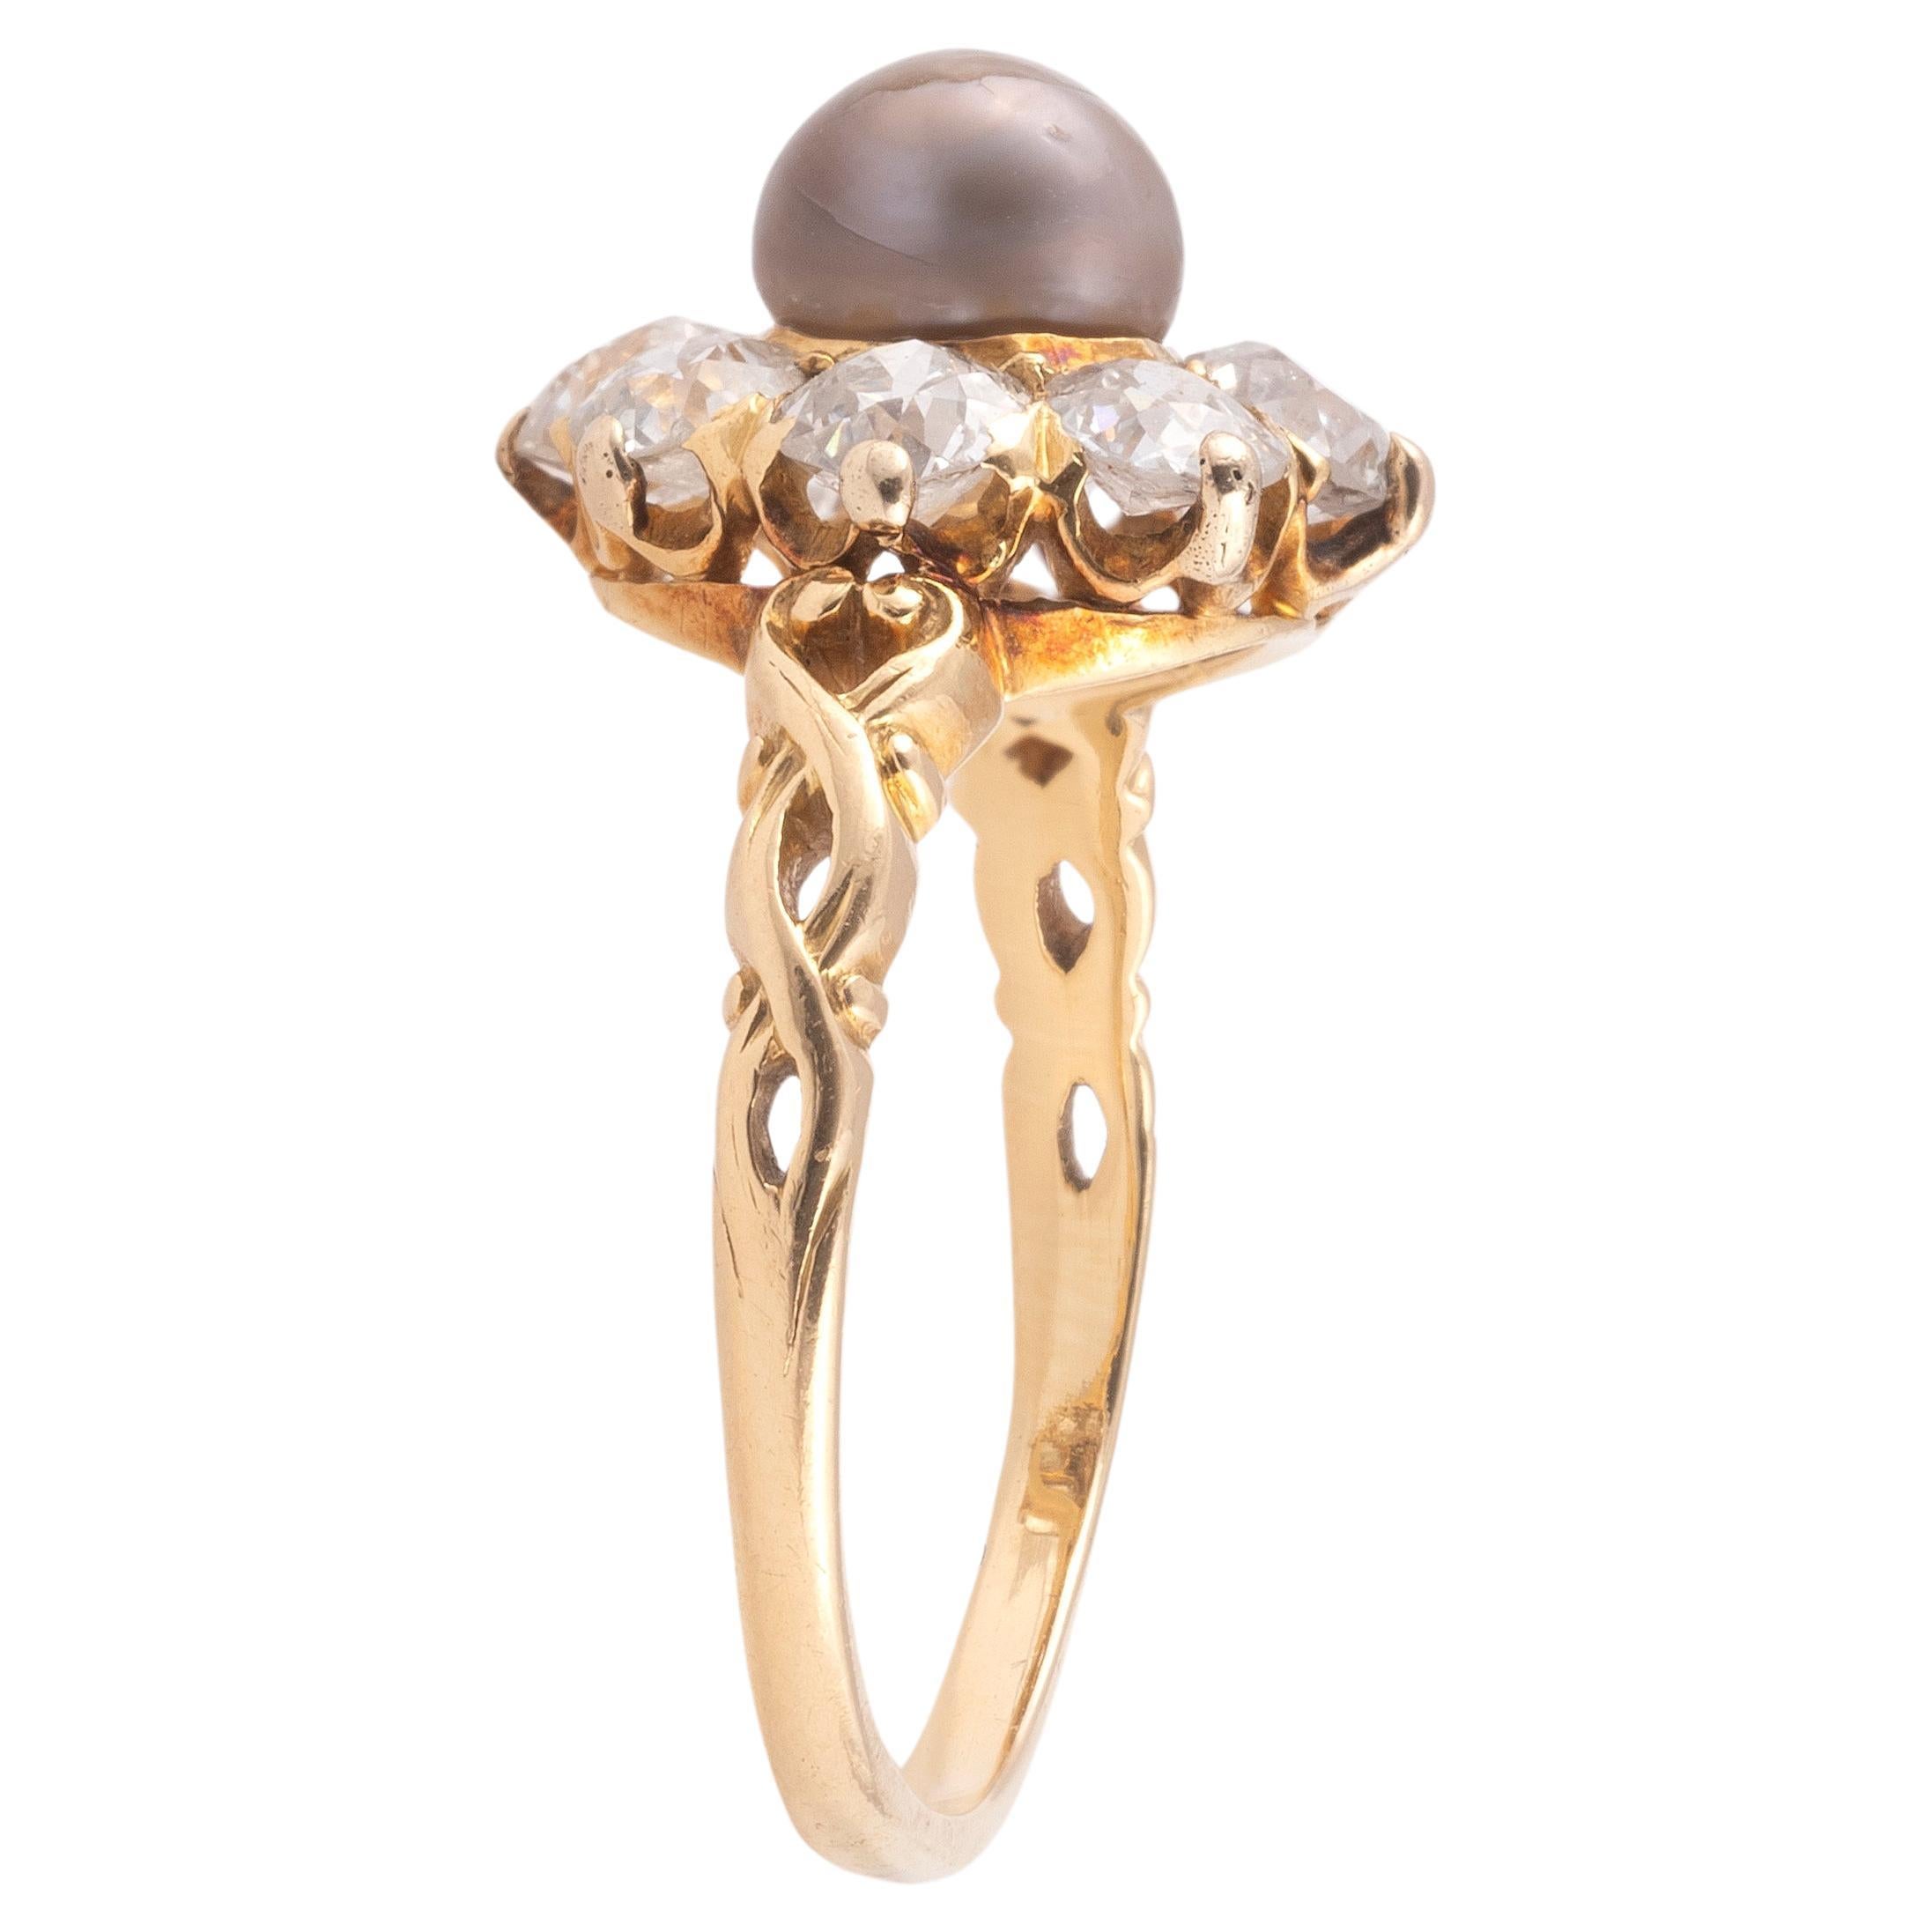 A pearl and diamond cluster ring.
A pearl surrounded by eight cushion shaped old-mine cut diamonds in a cluster to carved shoulders. Mounted in yellow gold. Each diamond is approx. 0.10 carats. The pearl approx. 6 mm.
Cluster Diameter: 14 mm
Weight: